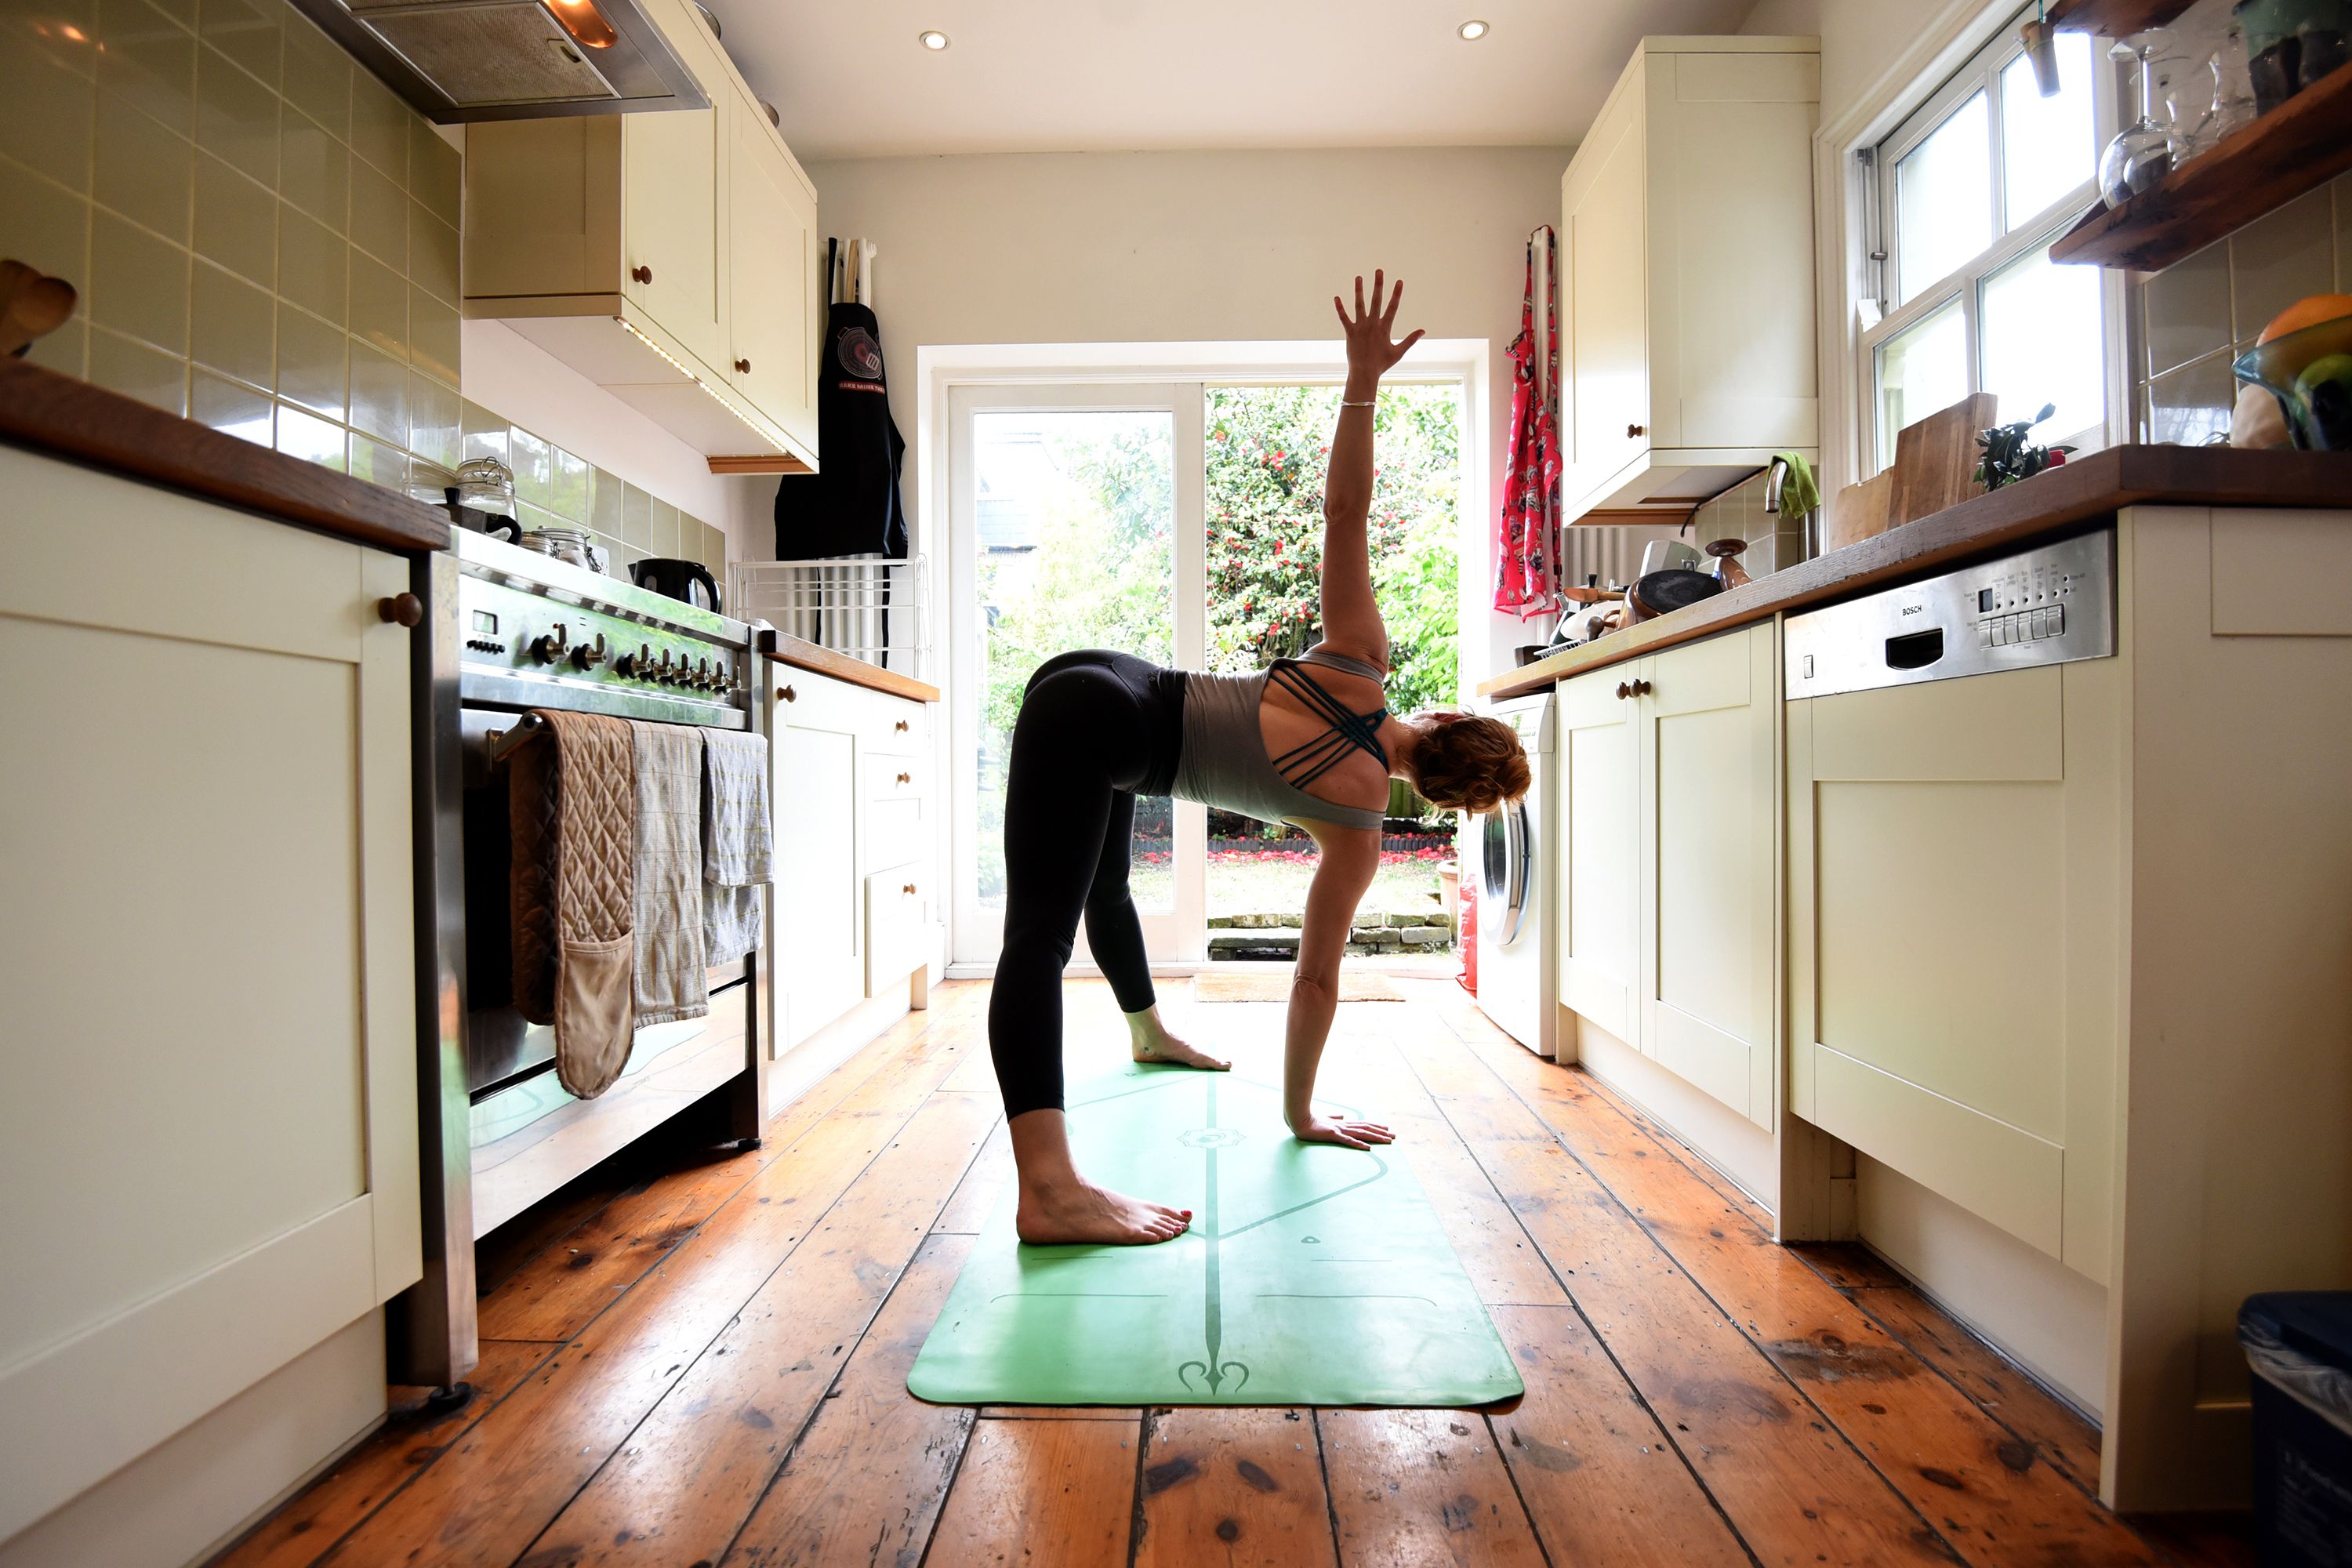 How to Do Hot Yoga At Home 2021 | The Strategist